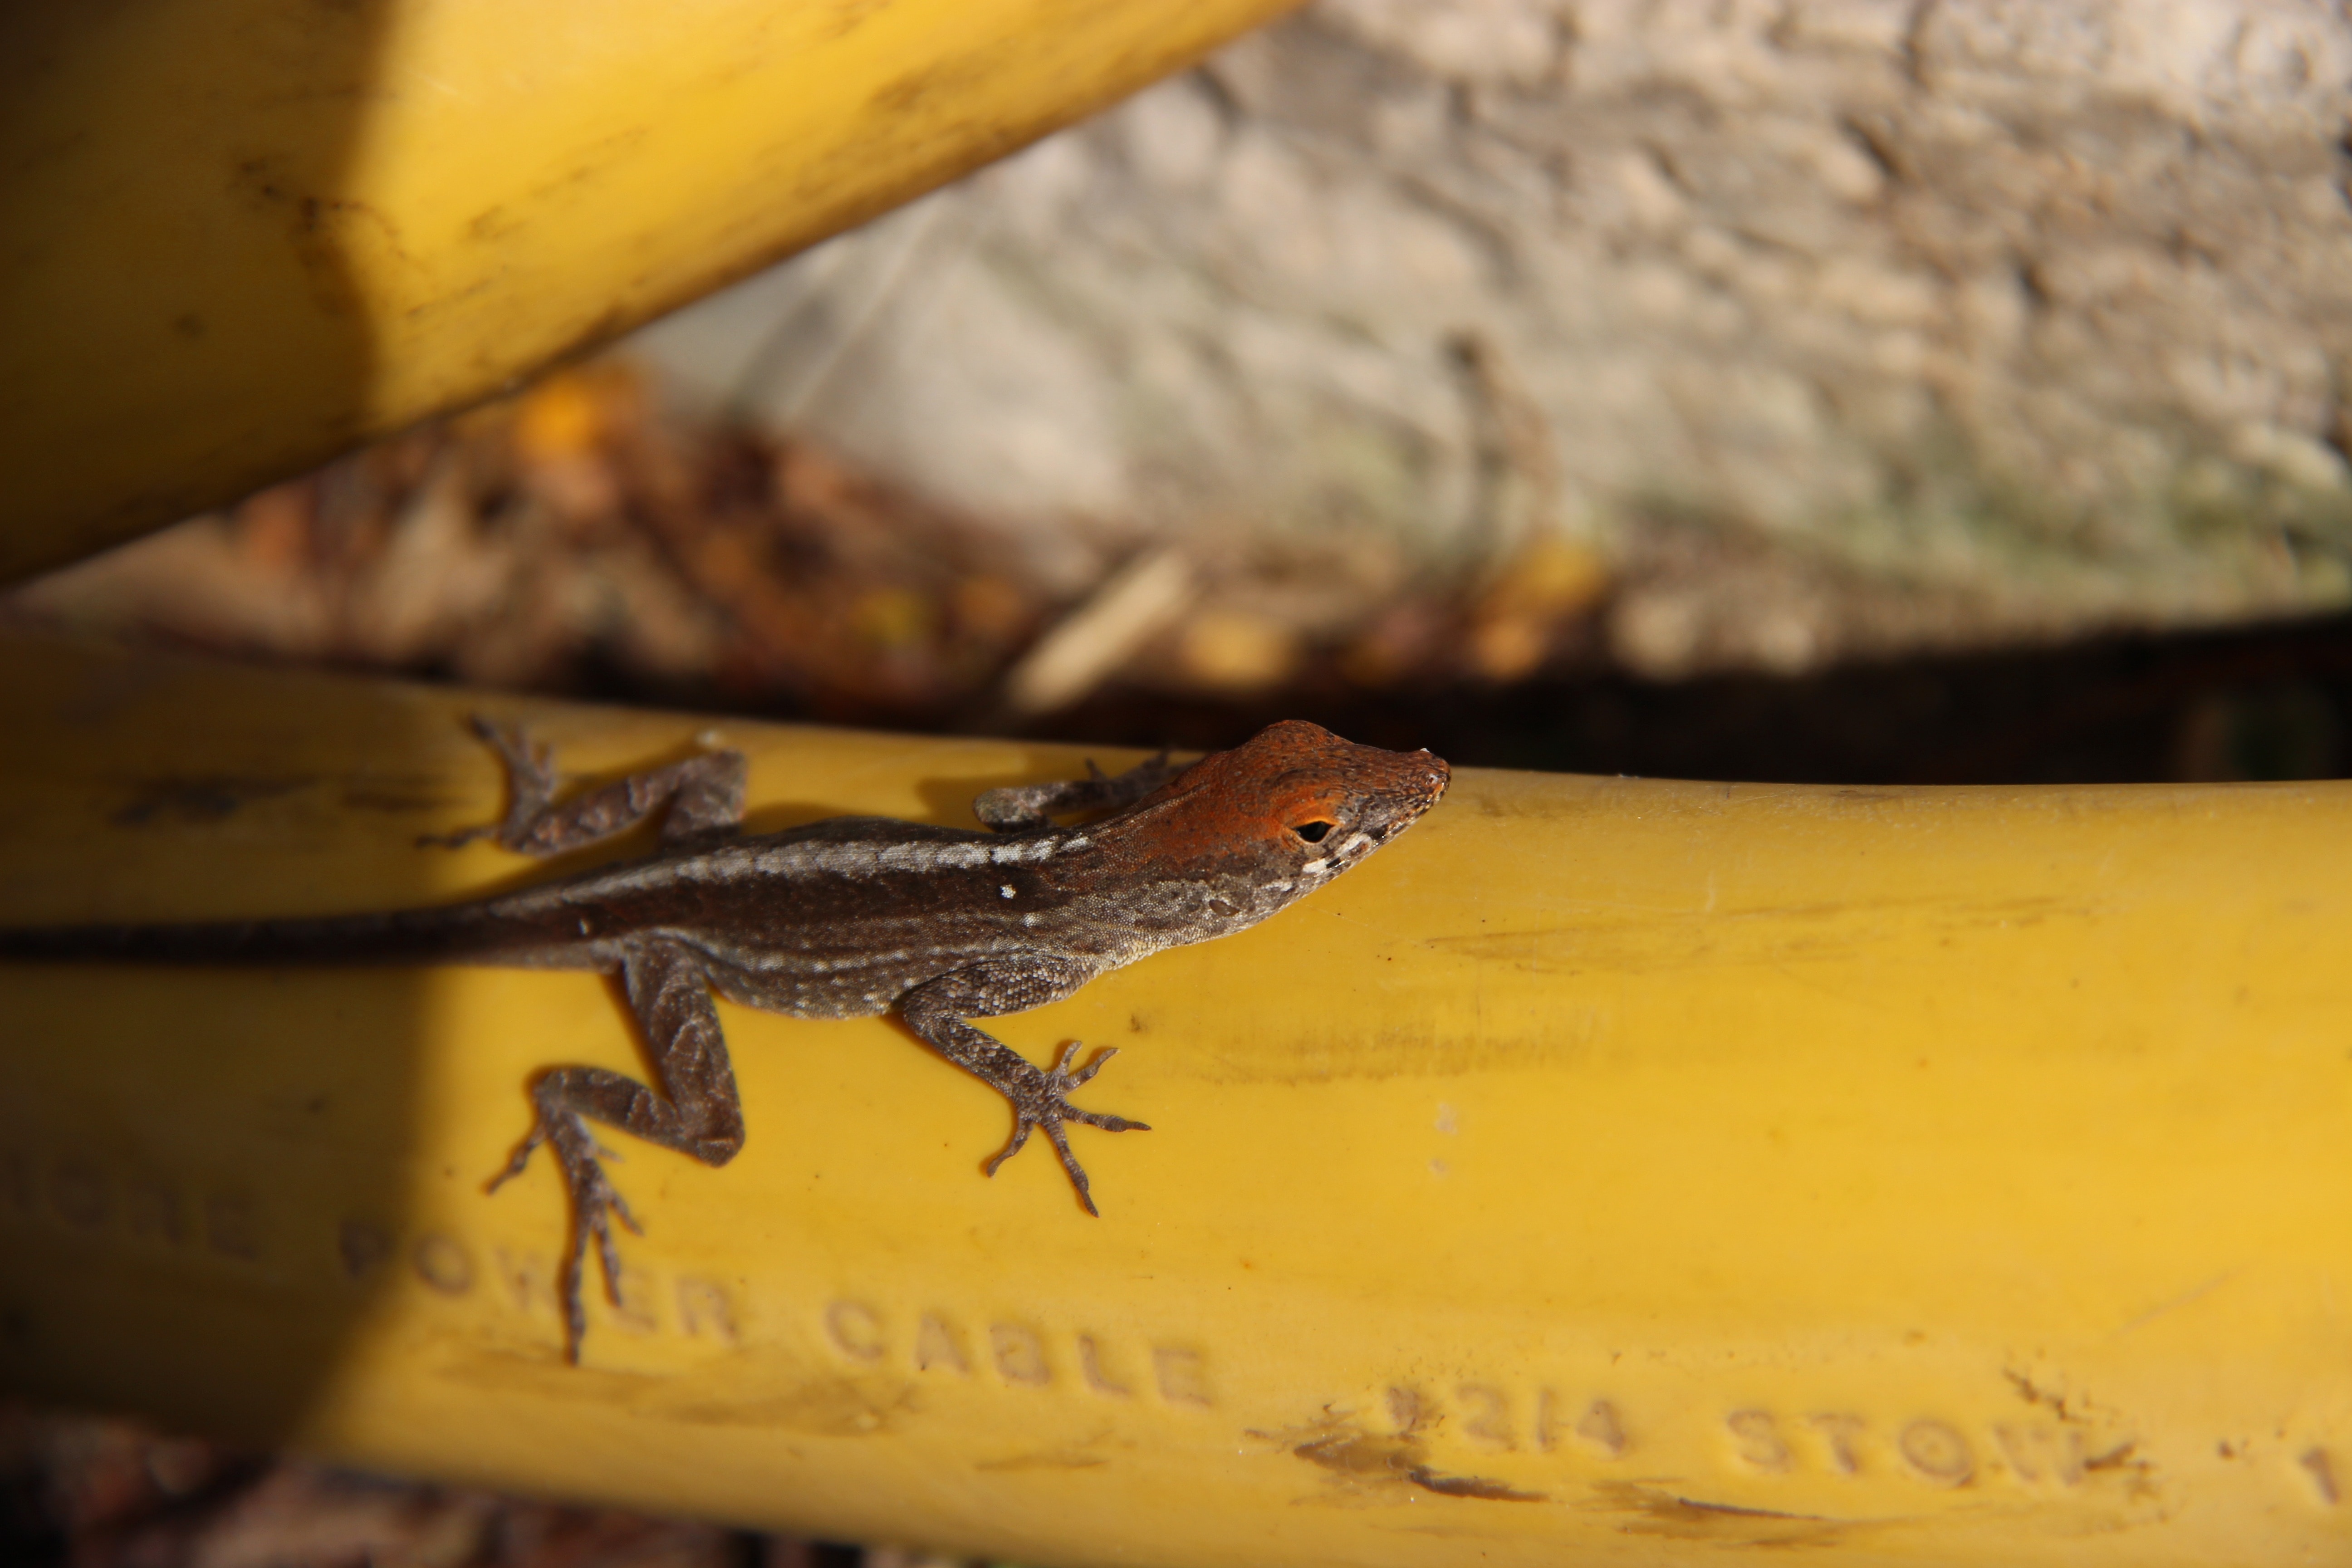 brown and gray lizard on yellow surface